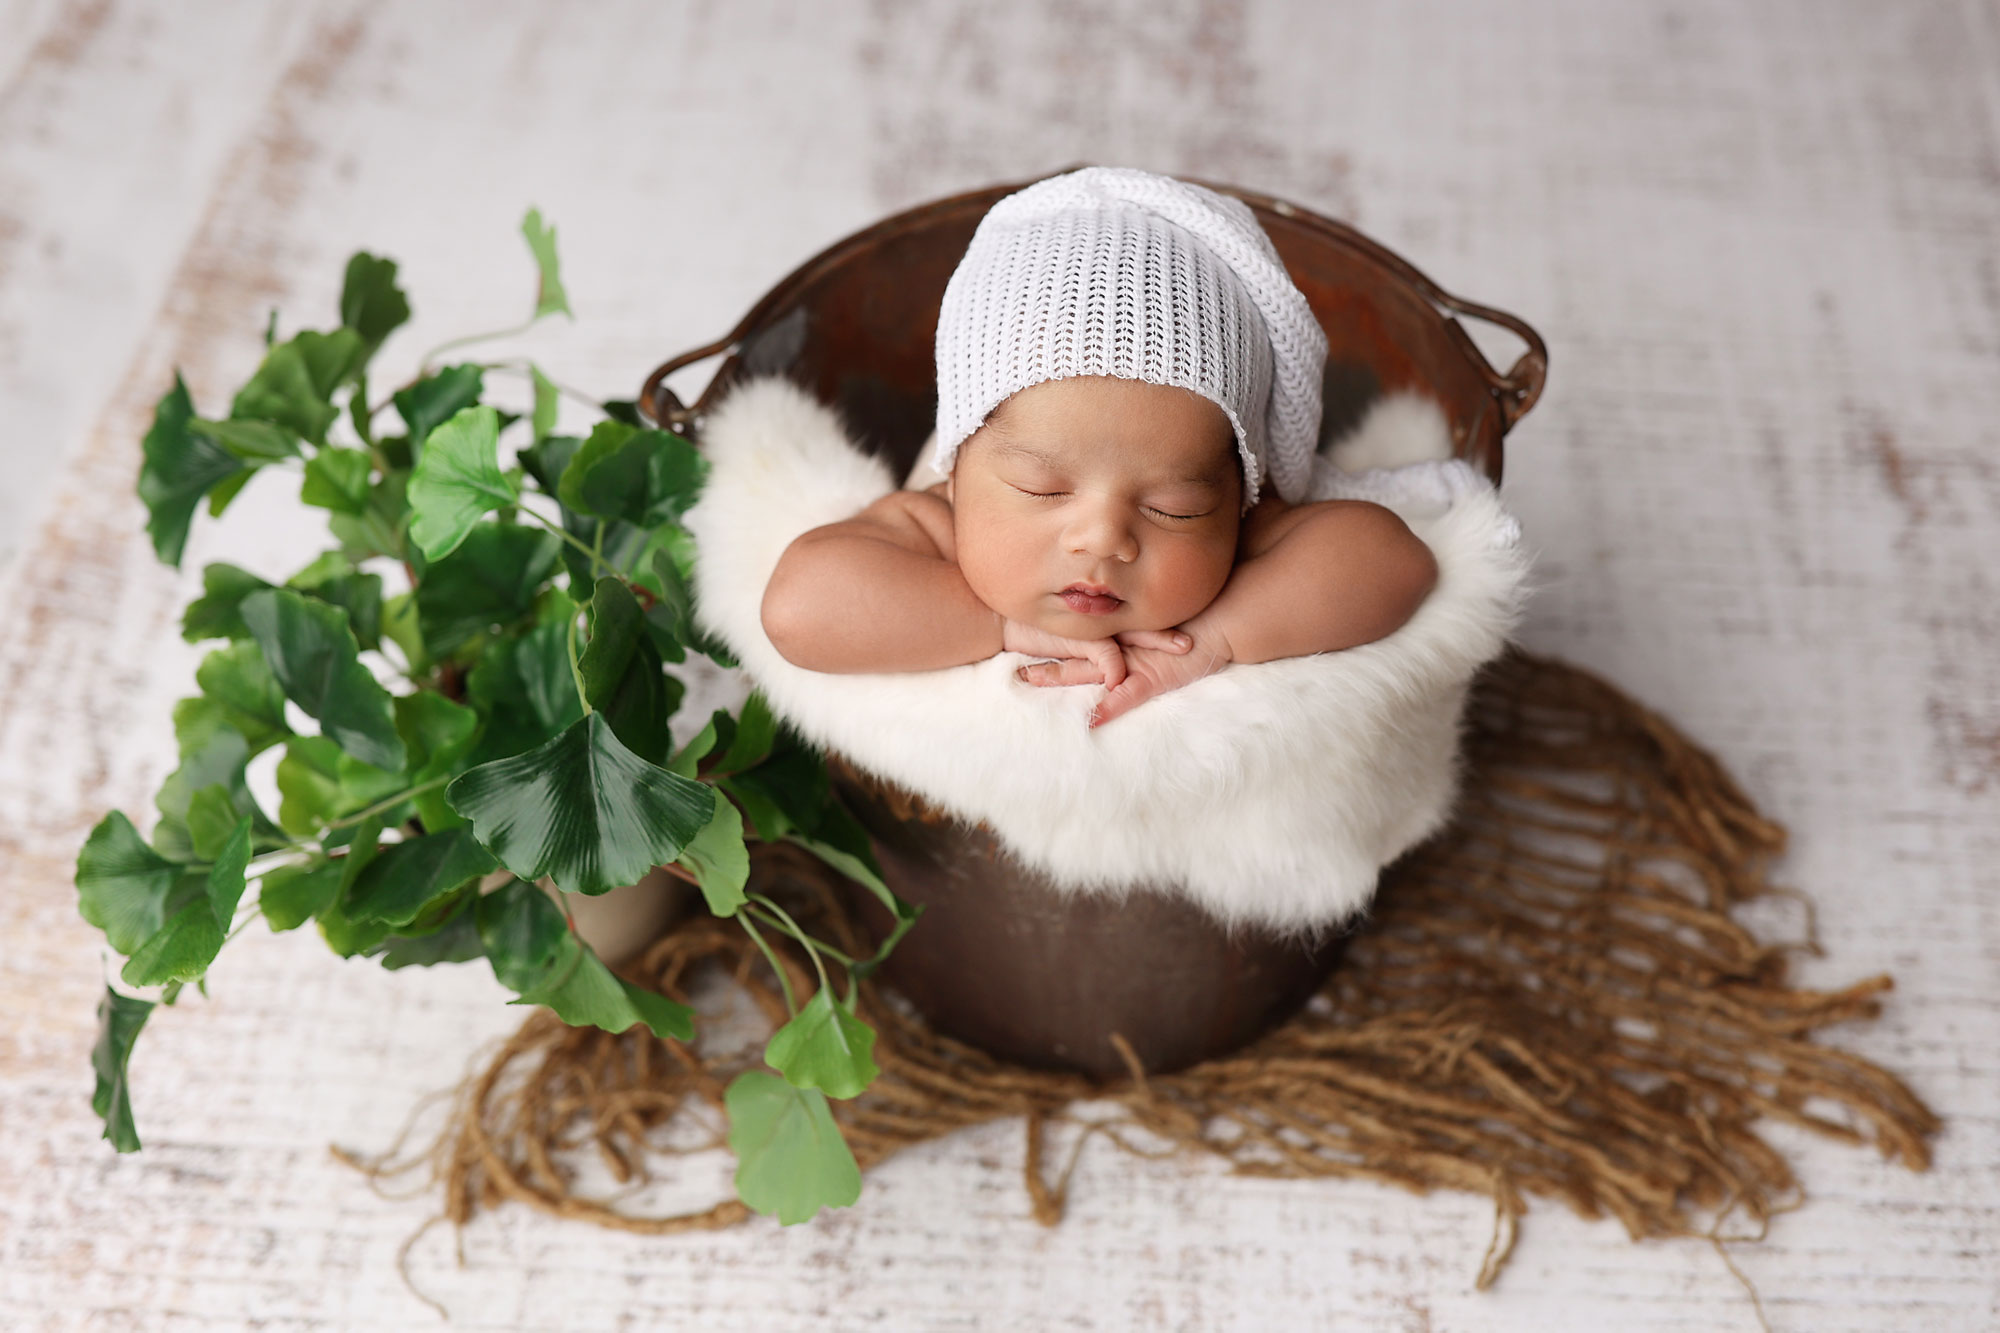 Top Secret - Why is Newborn Photography Expensive?